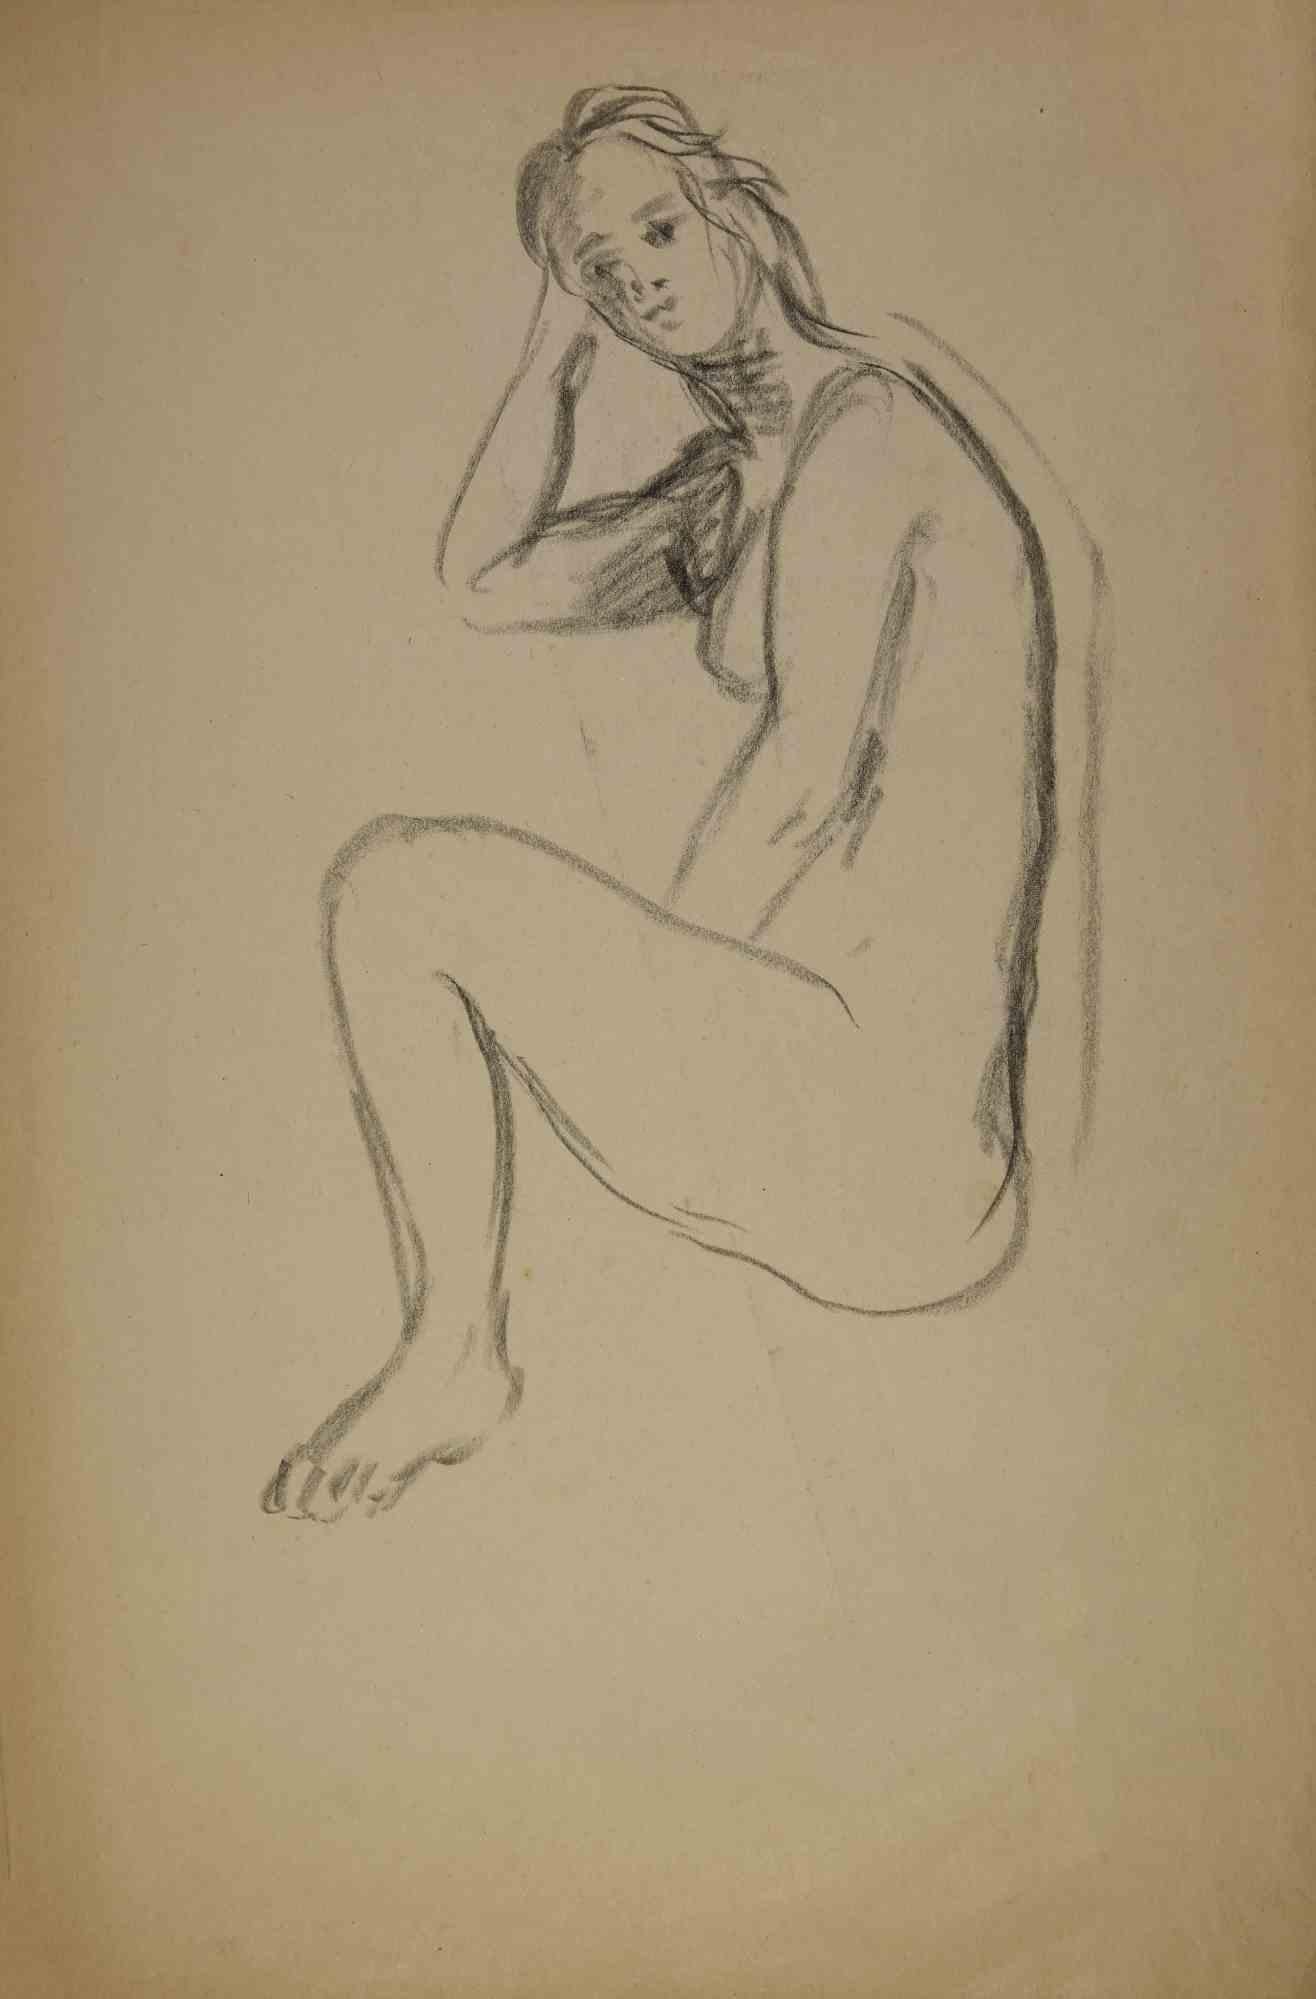 Naked Woman is an artwork, realized in early 20th Century, by the French Artist André Meaux Saint-Marc (1885-1941).

Drawing pencil on paper. Hand Signed on back.

The artist wants to define a well-balanced composition, through preciseness and